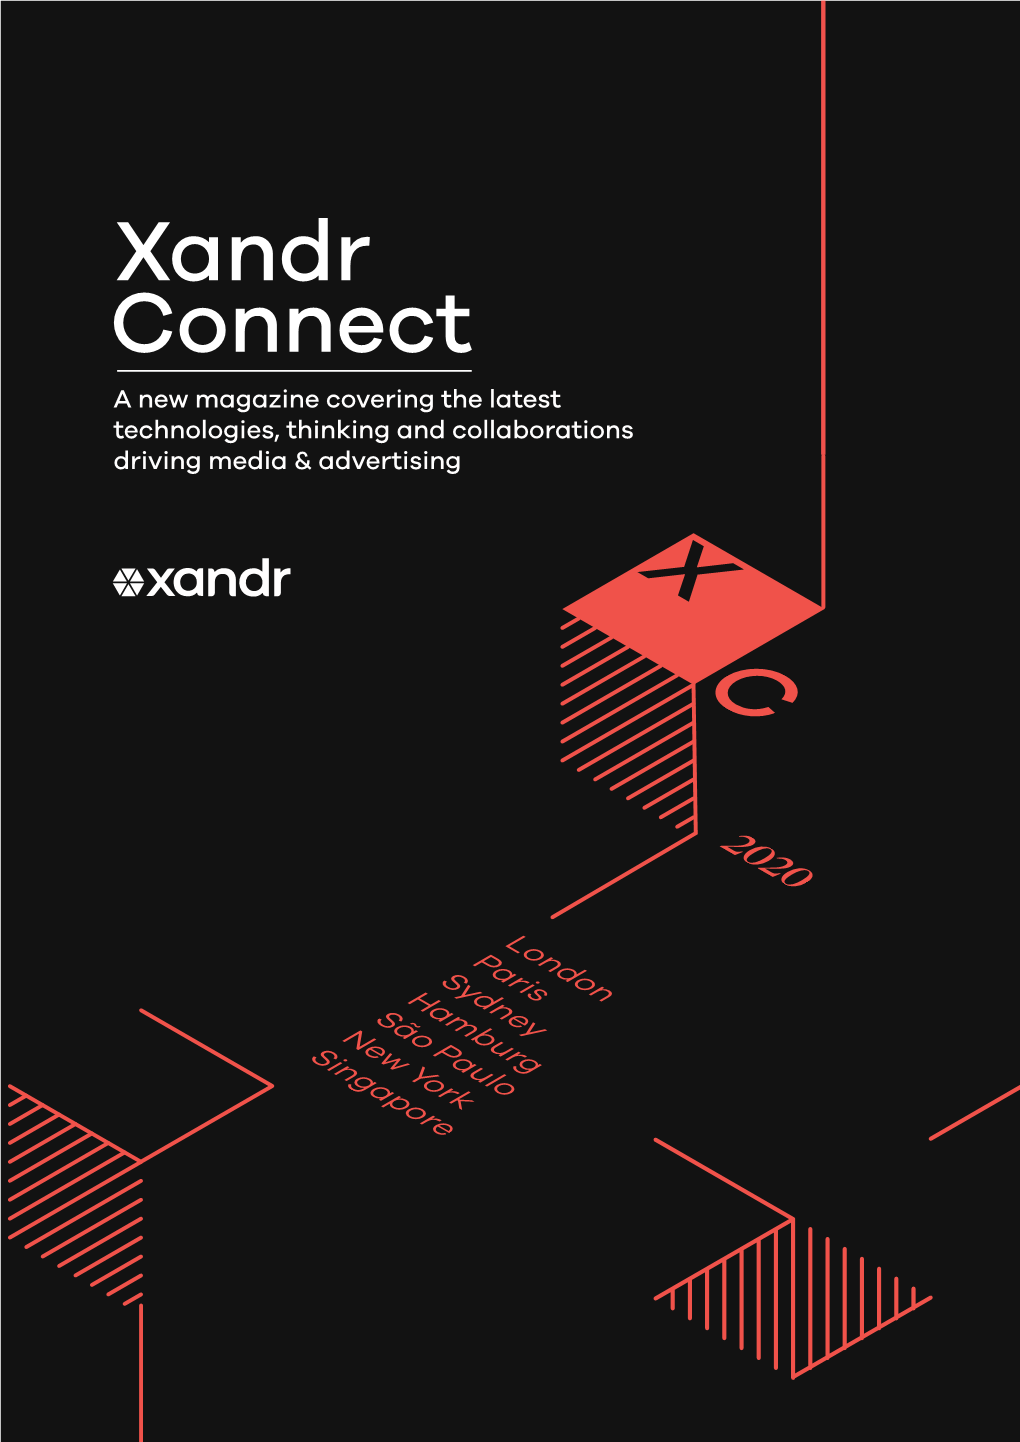 A New Magazine Covering the Latest Technologies, Thinking and Collaborations Driving Media & Advertising XANDR CONNECT